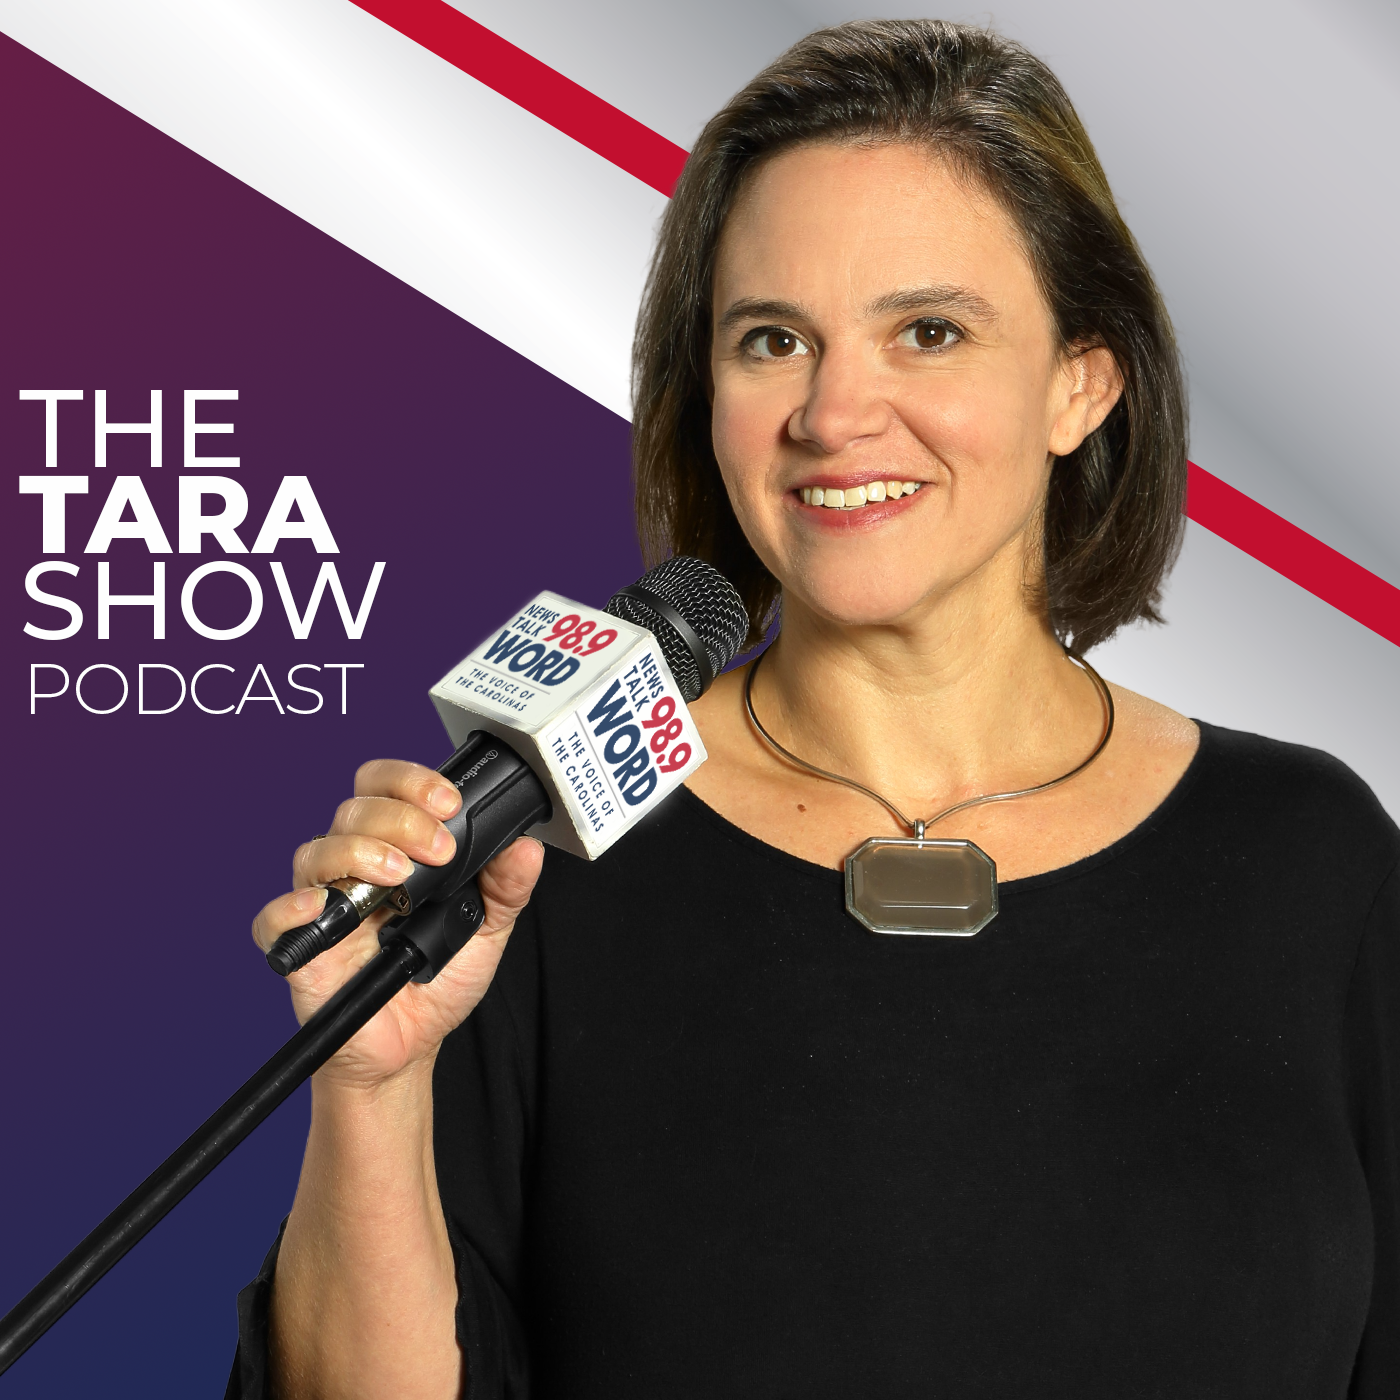 Hour 1: The Tara Show - “Mike Johnson Joins the Democrats” “Make it or Break for the Republic” “Idiots and Wildlife” “The 2024 Trump Trial”